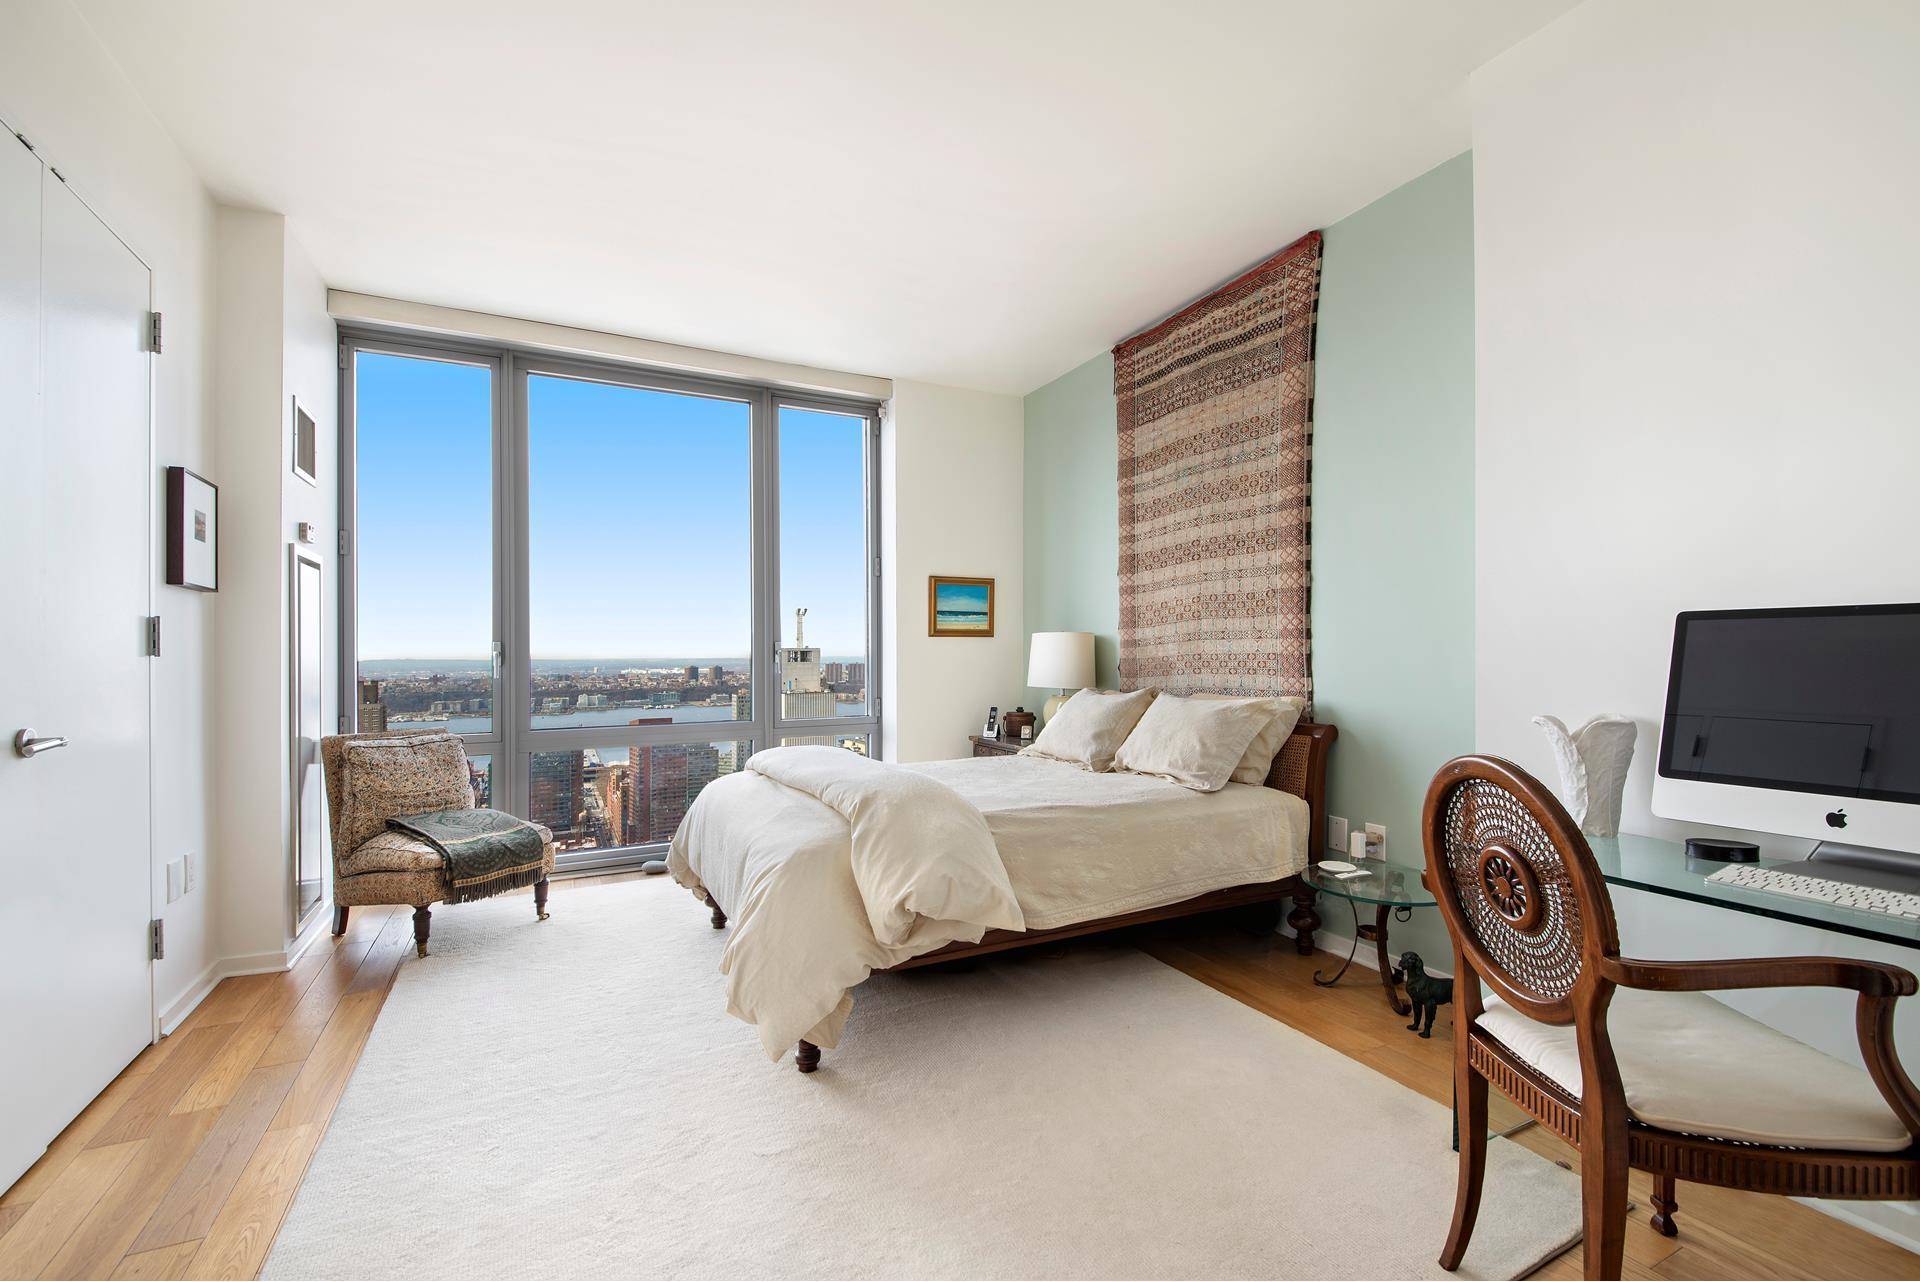 Stunning 1 bedroom perched on a high floor in on of one of Manhattan's most sought after luxury building !